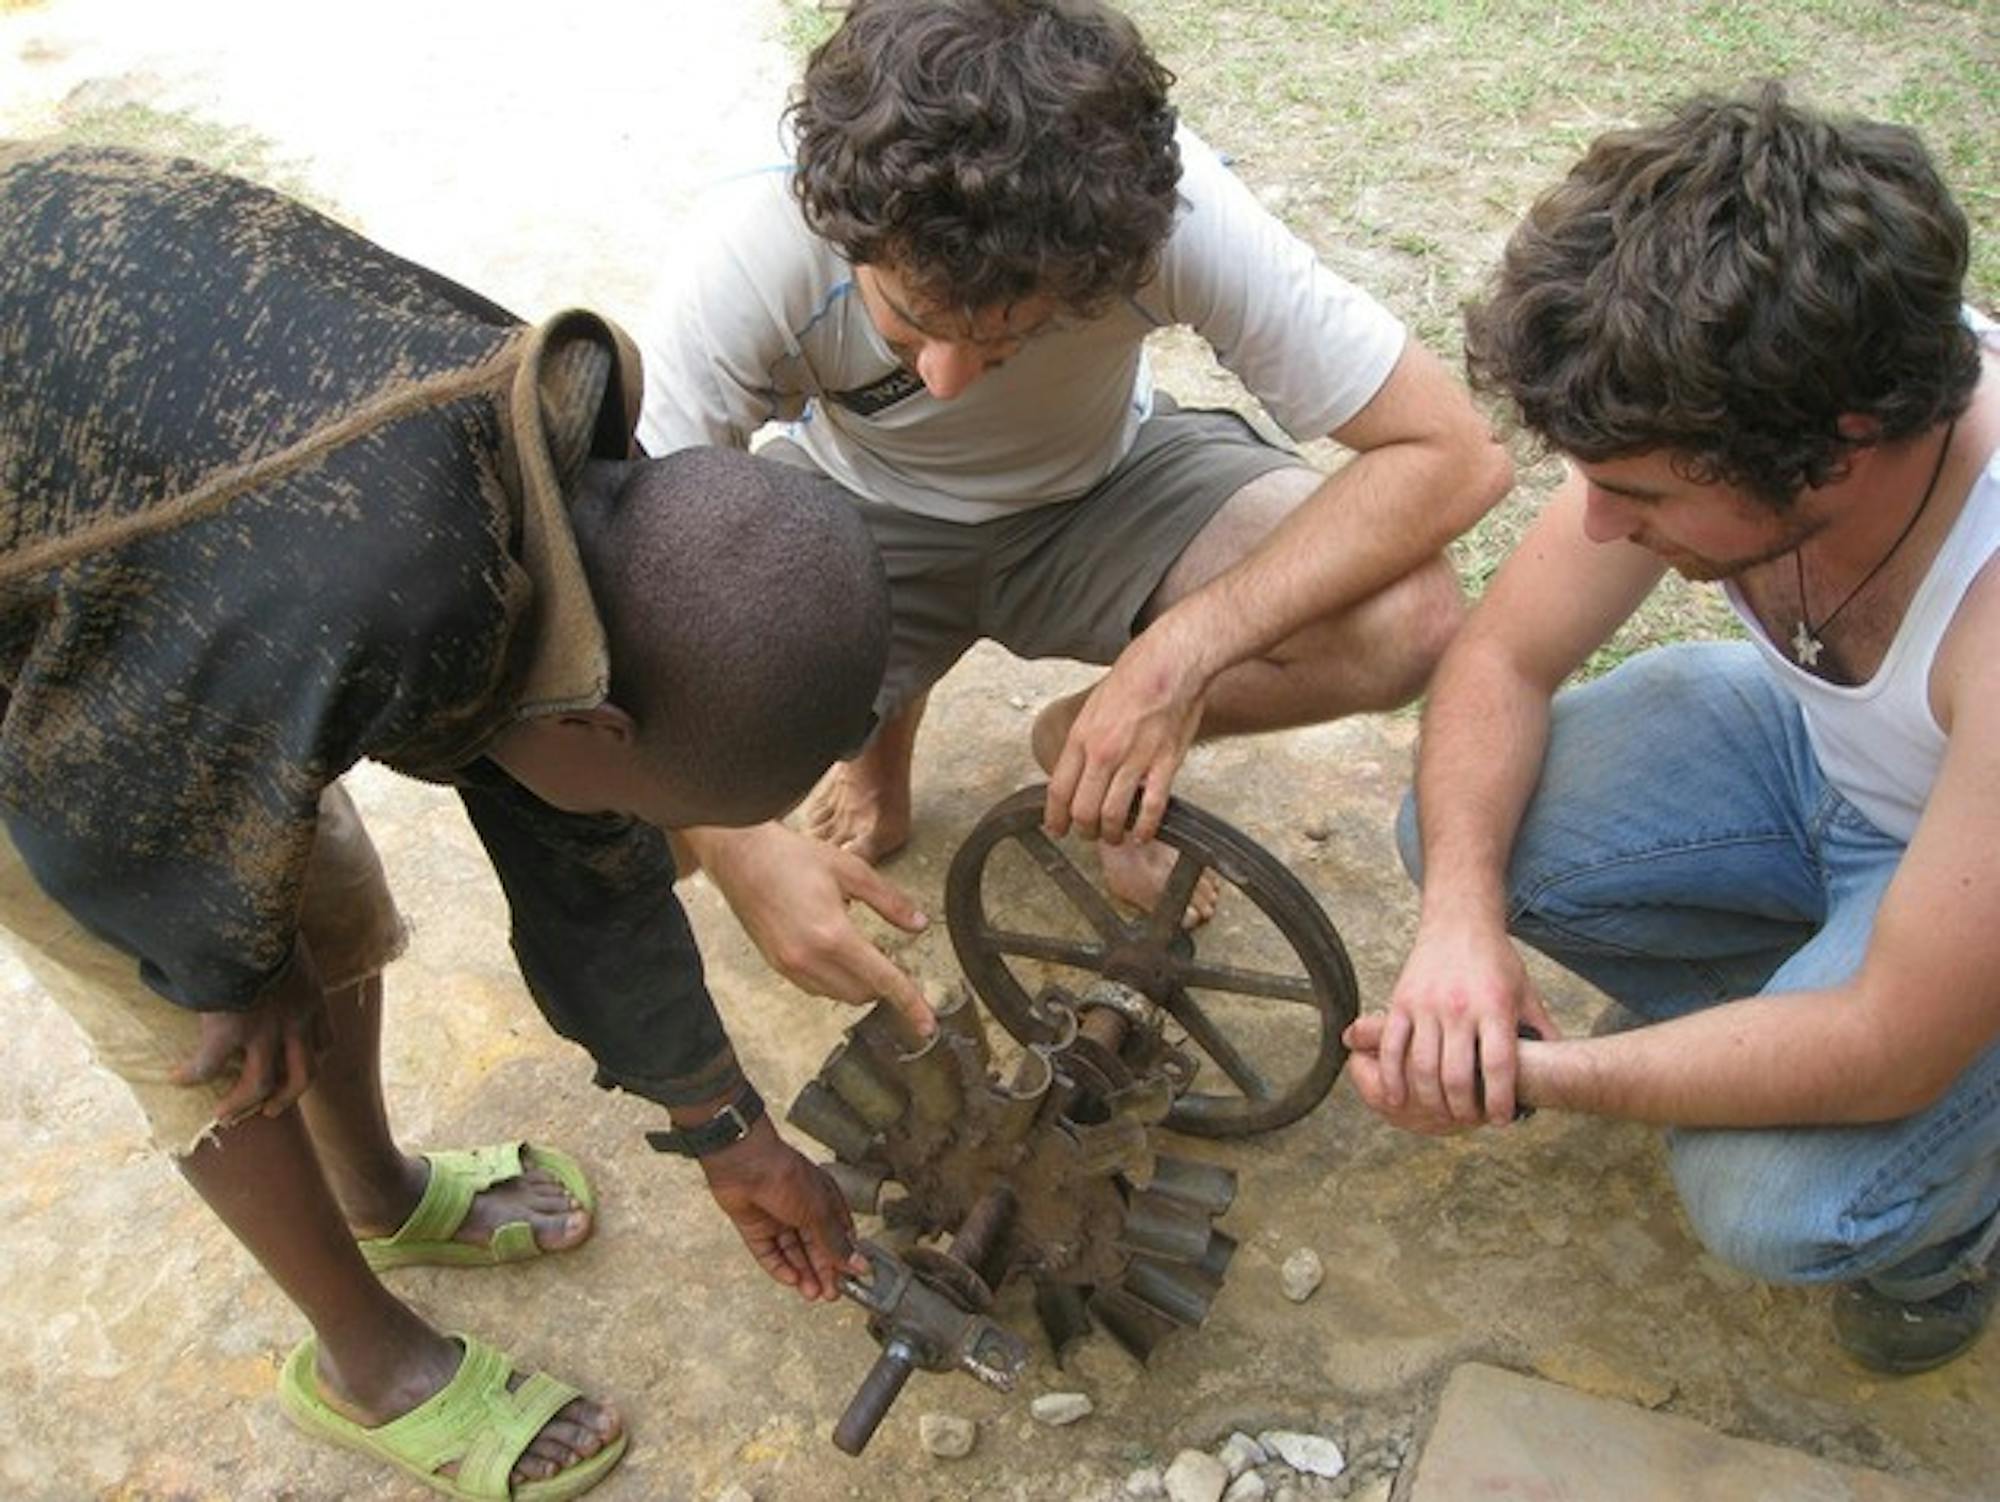 Members of Dartmouth Humanitarian Engineering work on a project to expand hydroelectric power in Rwanda.